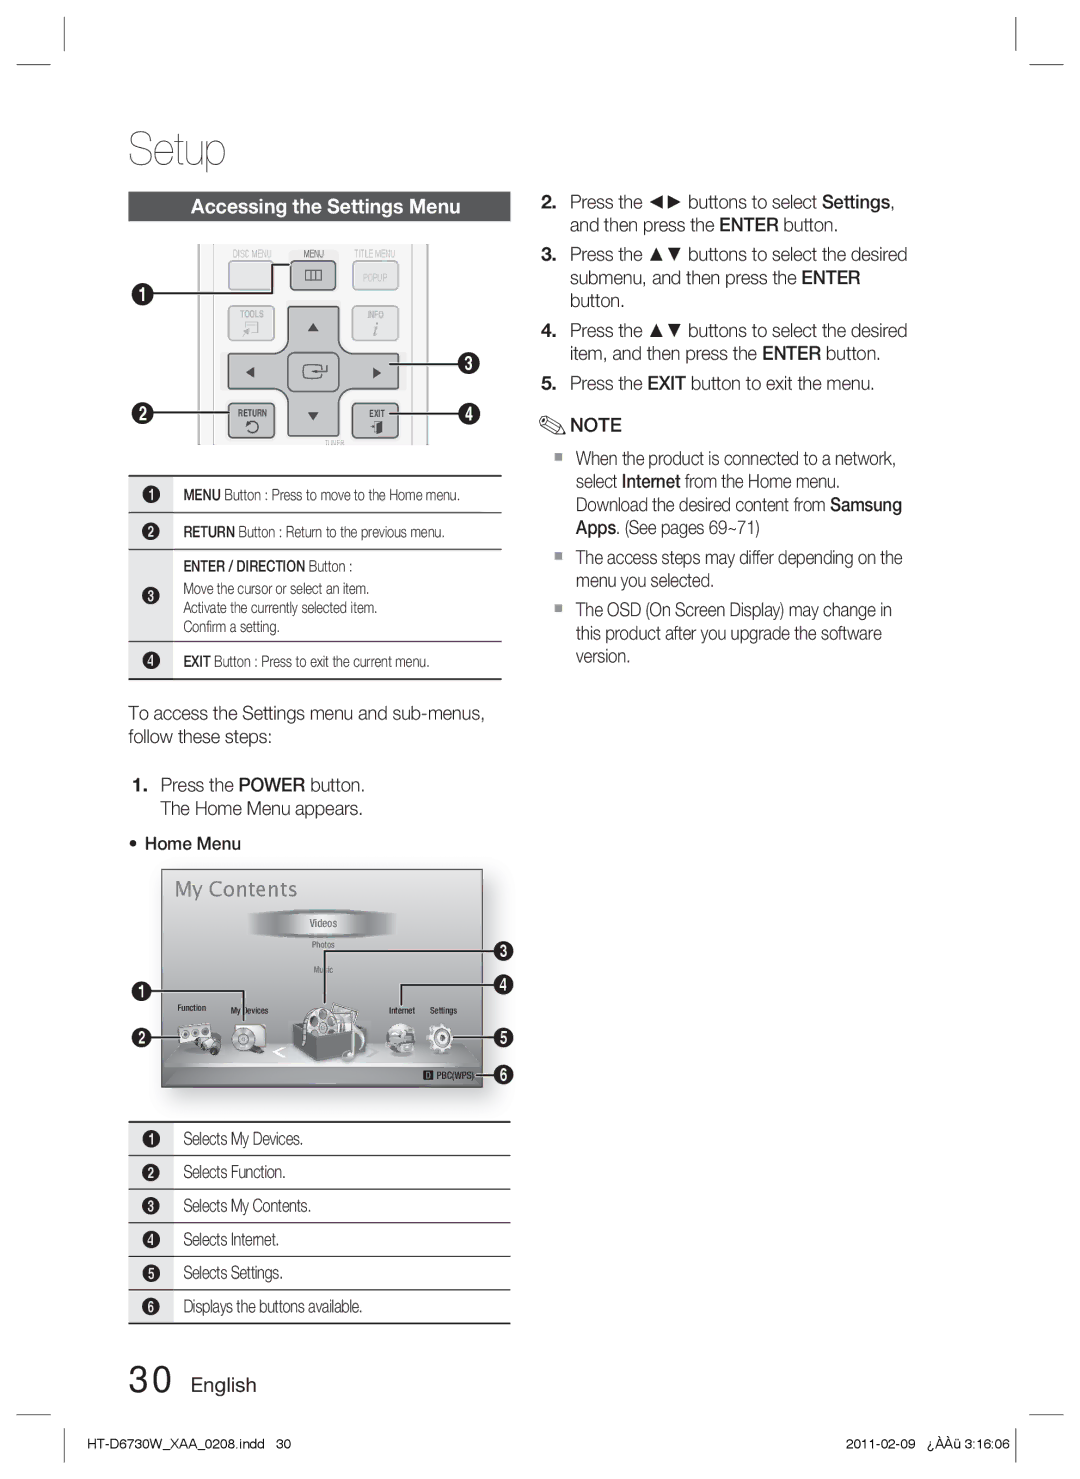 Samsung HT-D6730W user manual My Contents 